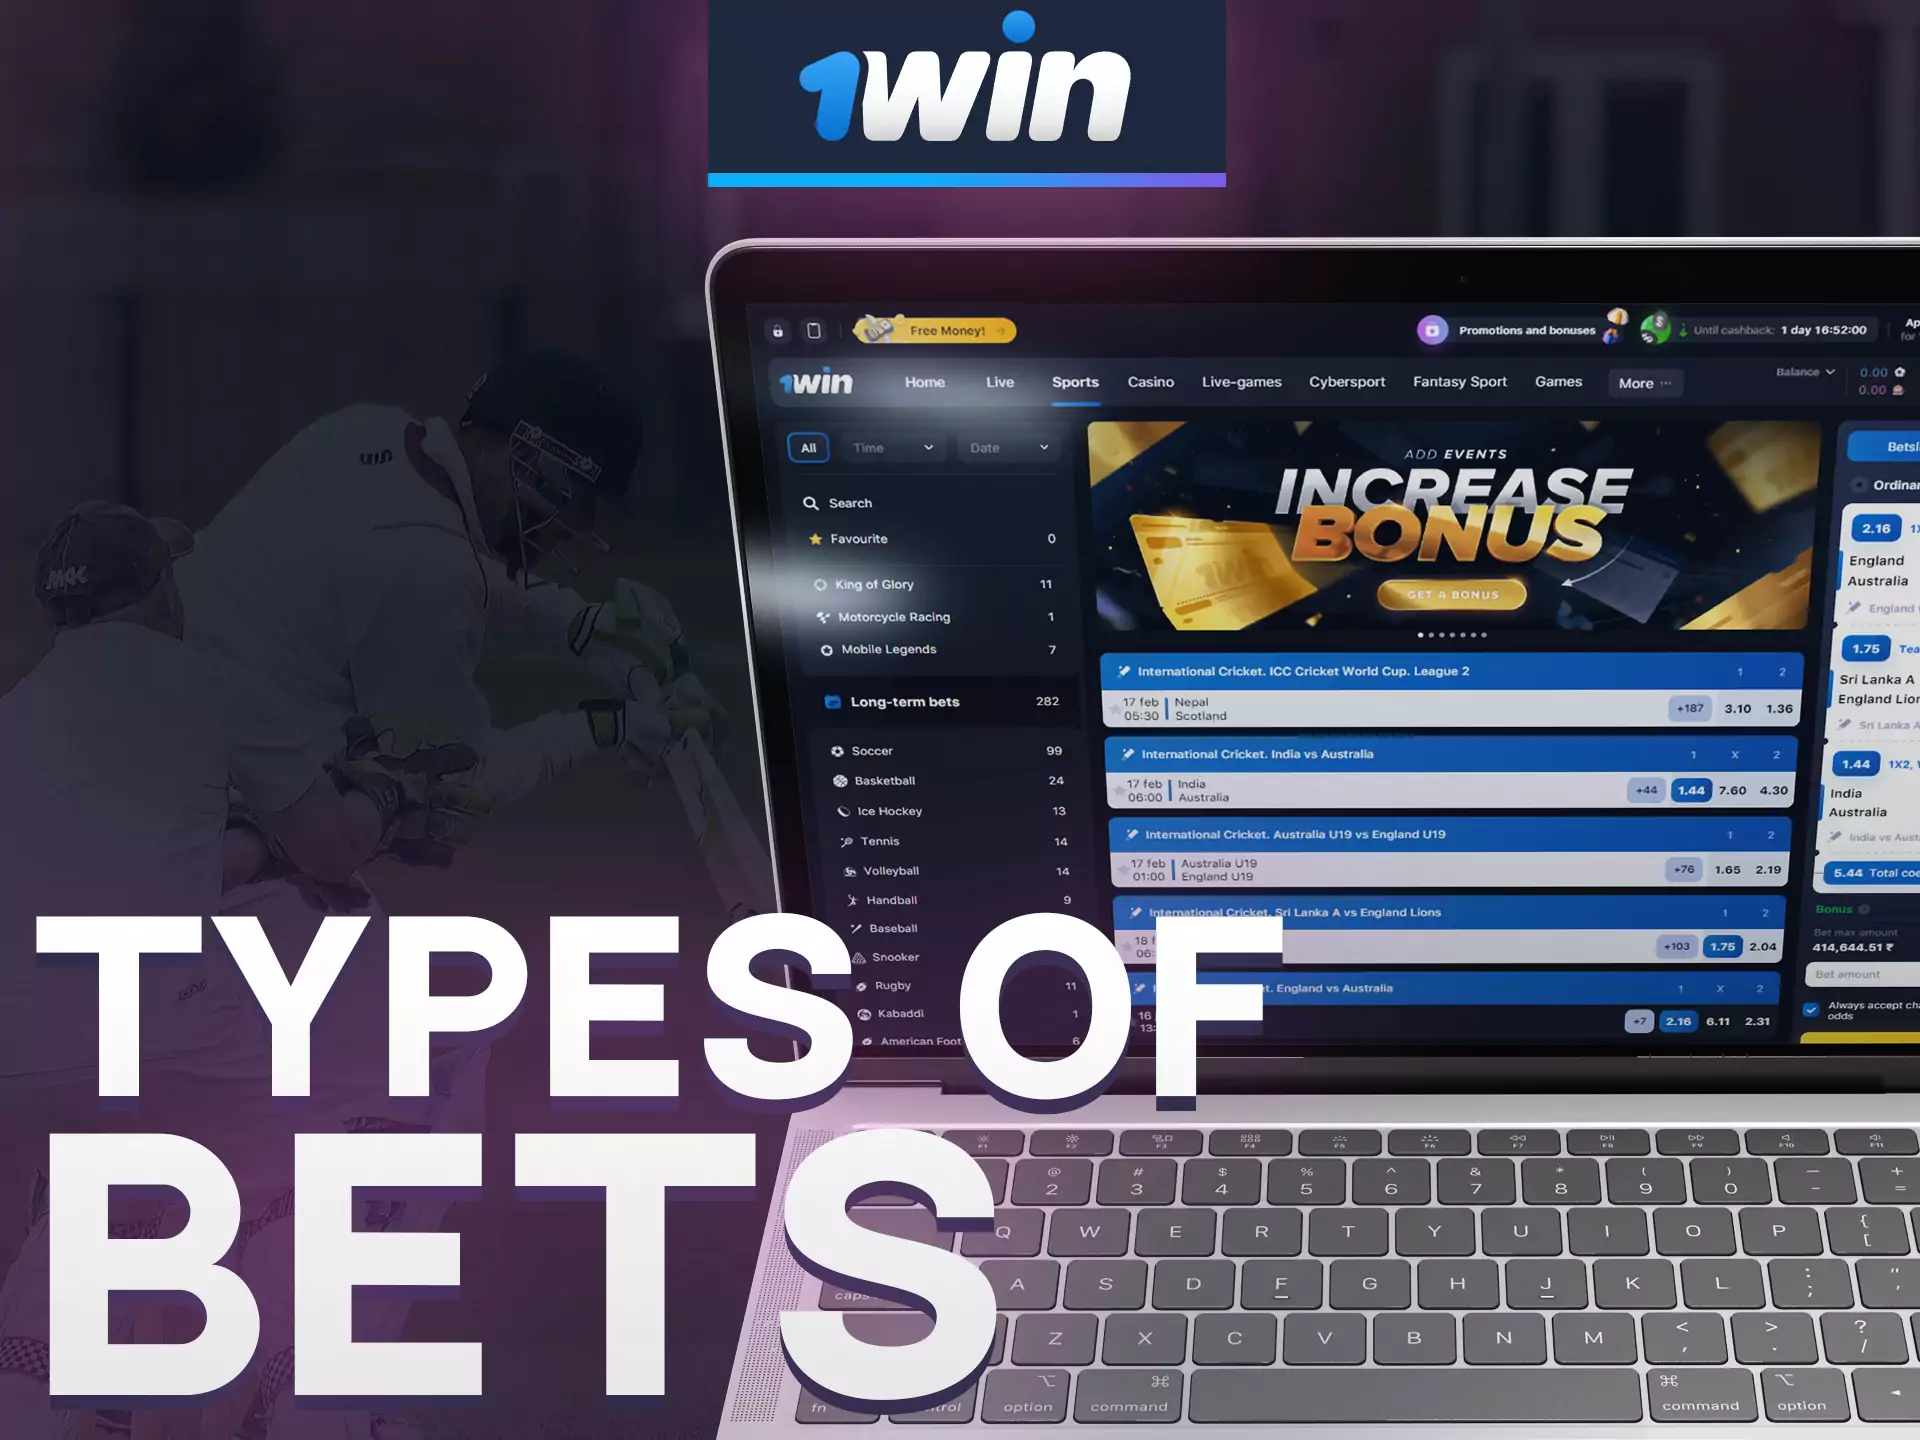 Make different types of bets at 1win and win money.